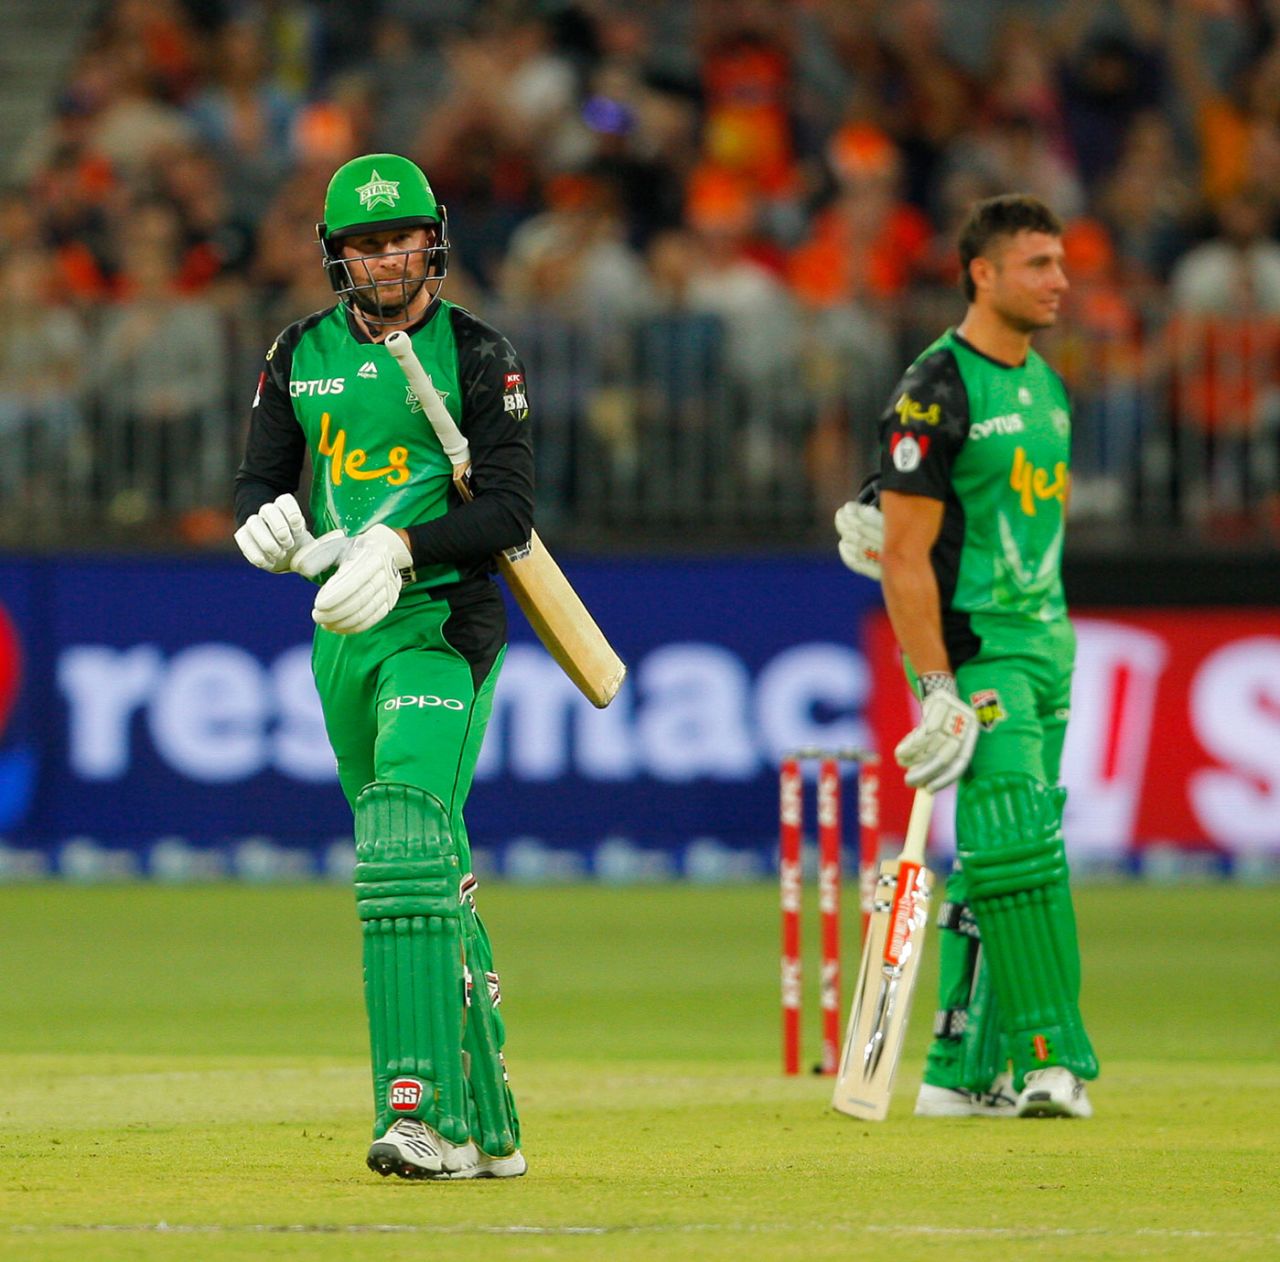 Ben Dunk leaves the field after being given out, Perth Scorchers v Melbourne Stars, Big Bash League, Perth Stadium, February 3, 2019